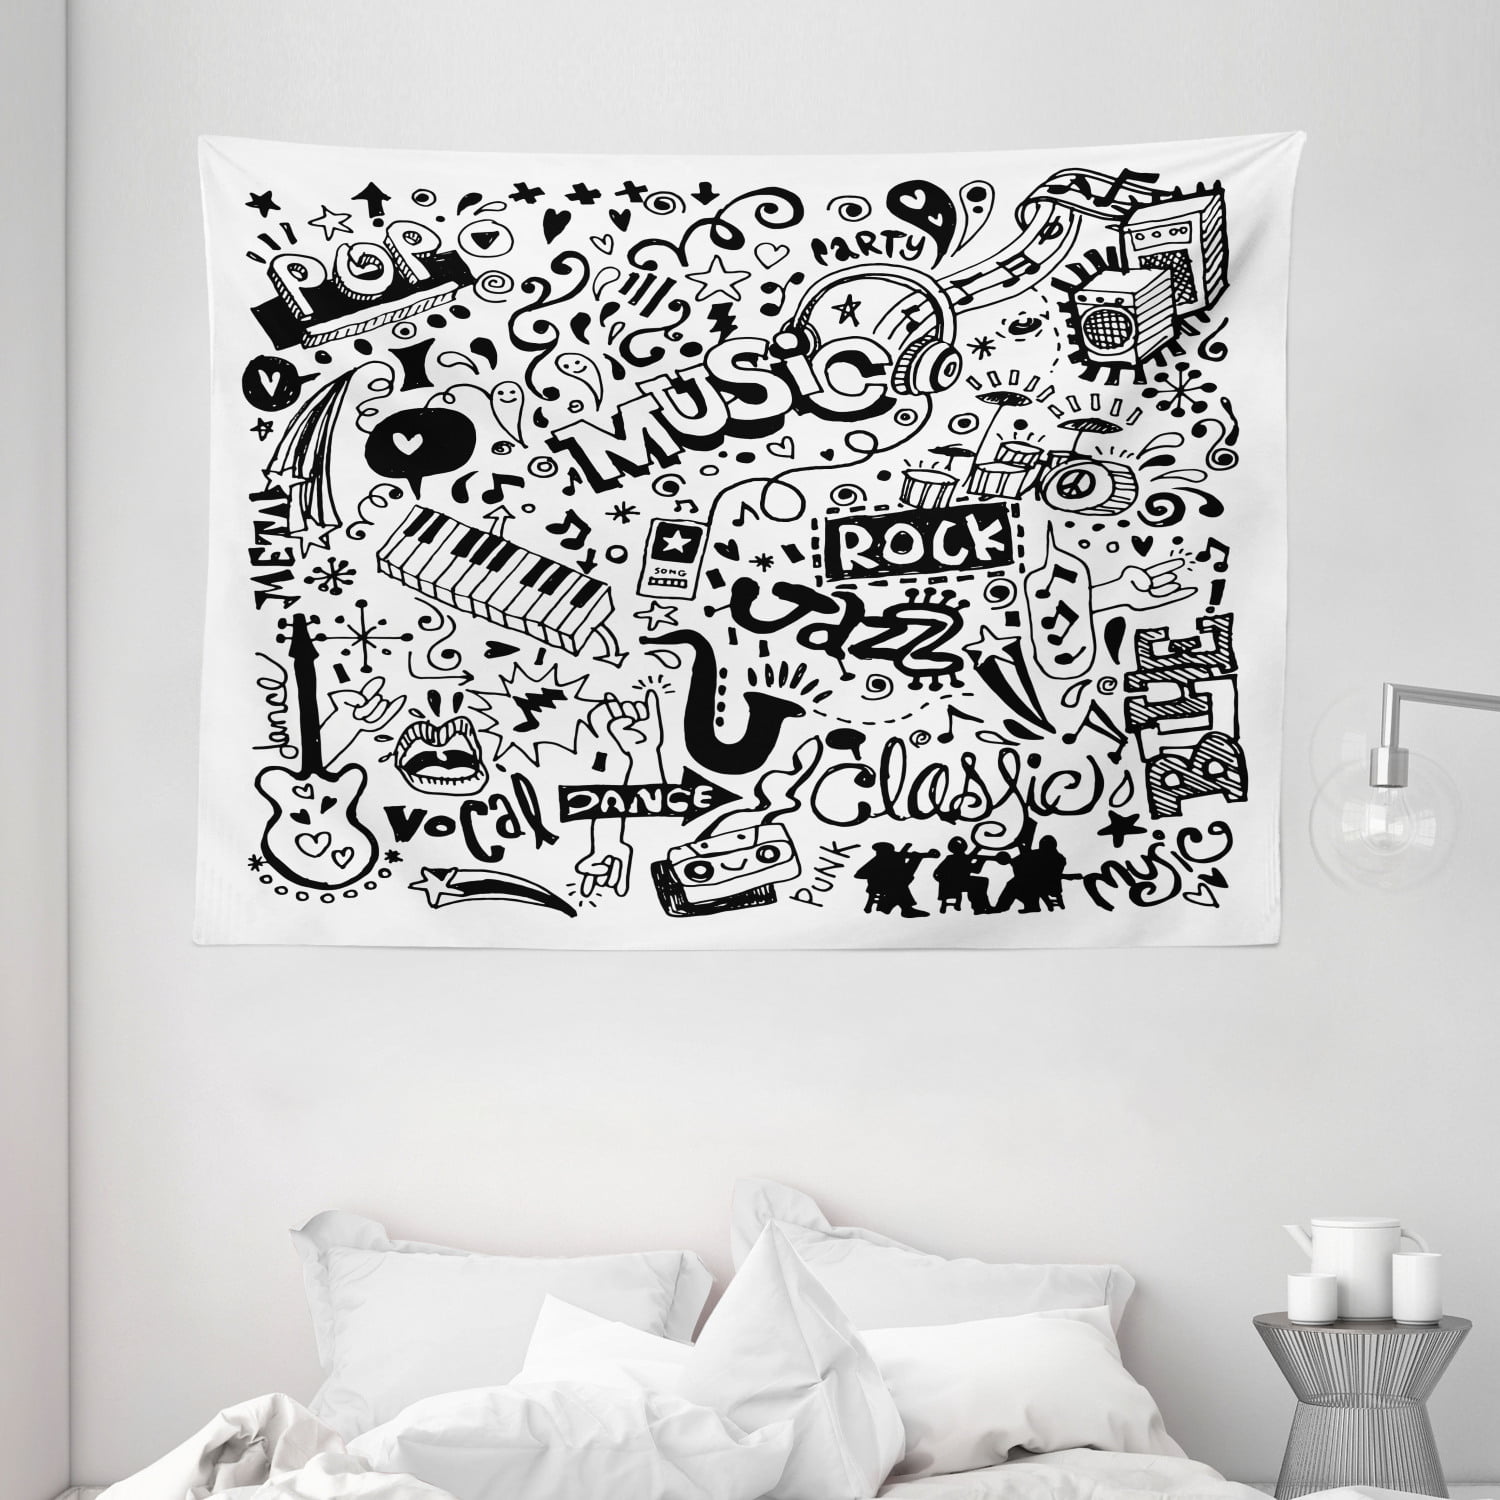 Music Tapestry Wall Hanging Art Bedroom Dorm Room 2 Sizes Available 